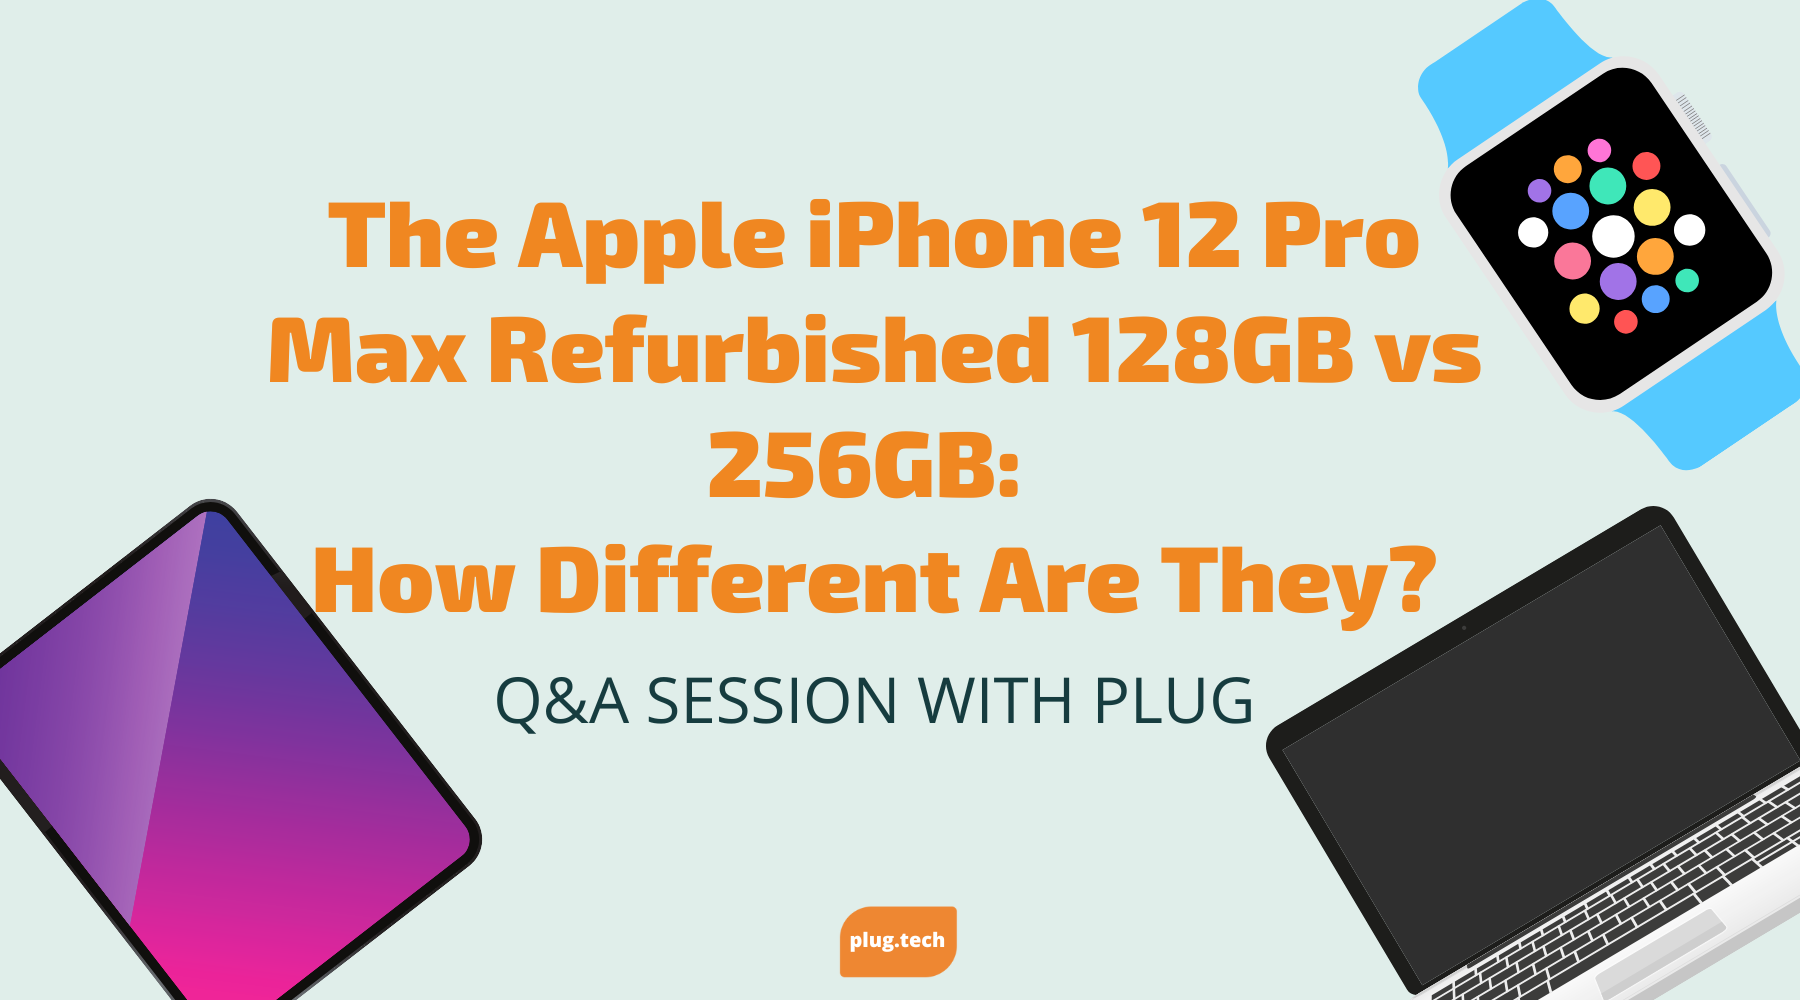 The Apple iPhone 12 Pro Max Refurbished 128GB vs 256GB: How Different Are They?